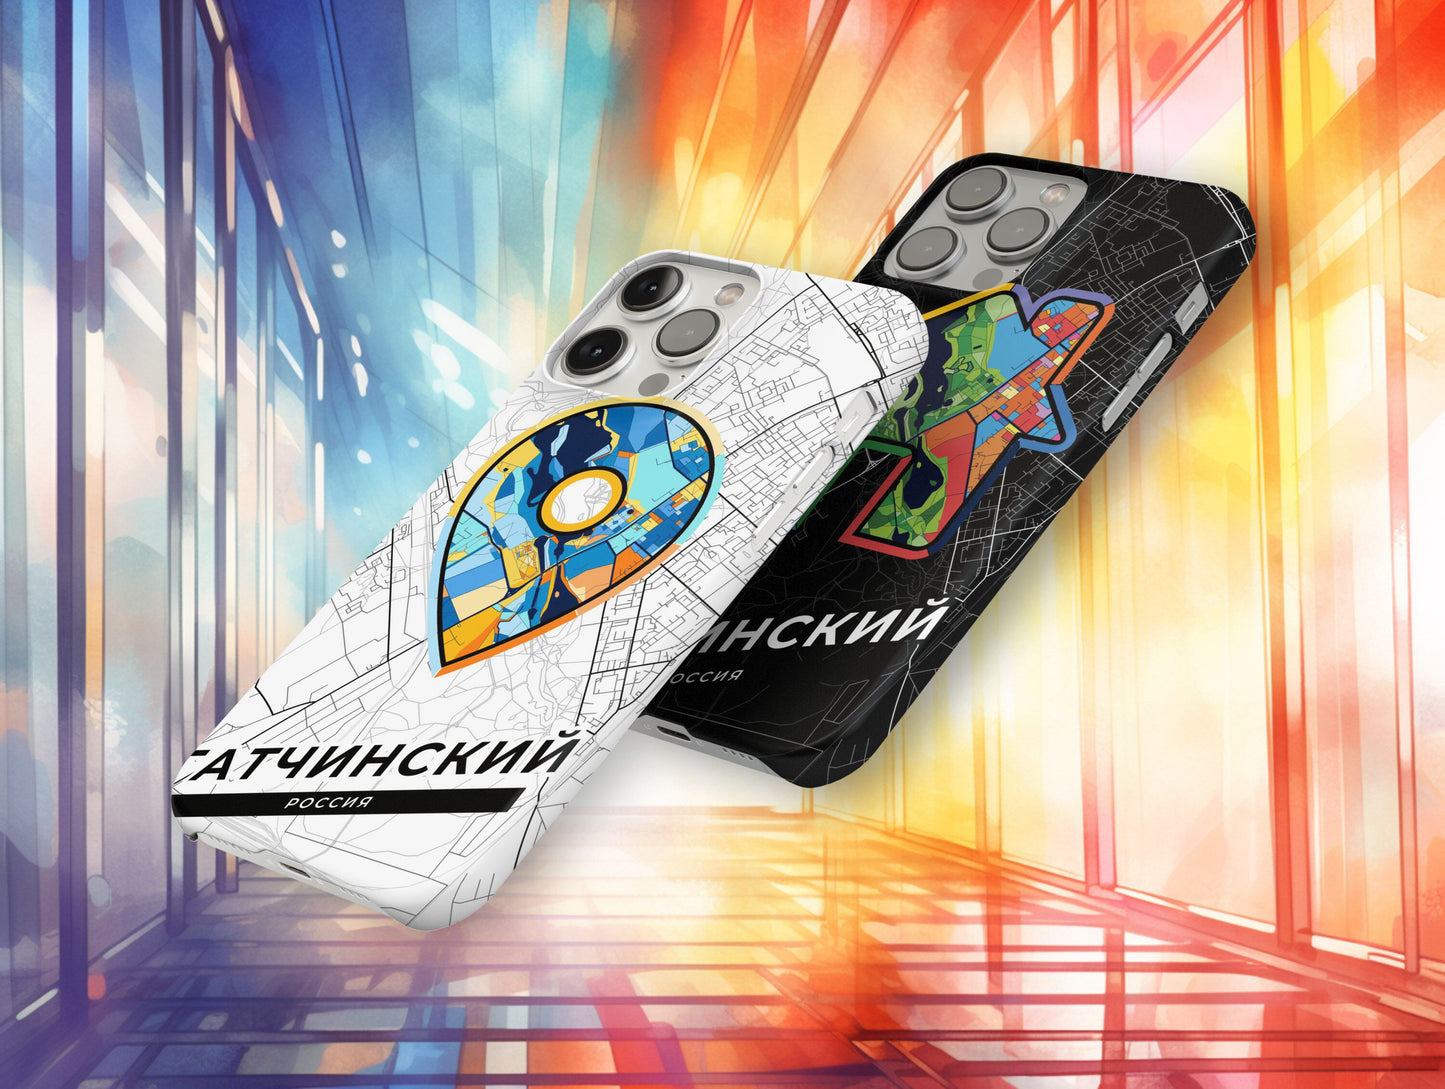 Gatchina Russia slim phone case with colorful icon. Birthday, wedding or housewarming gift. Couple match cases.